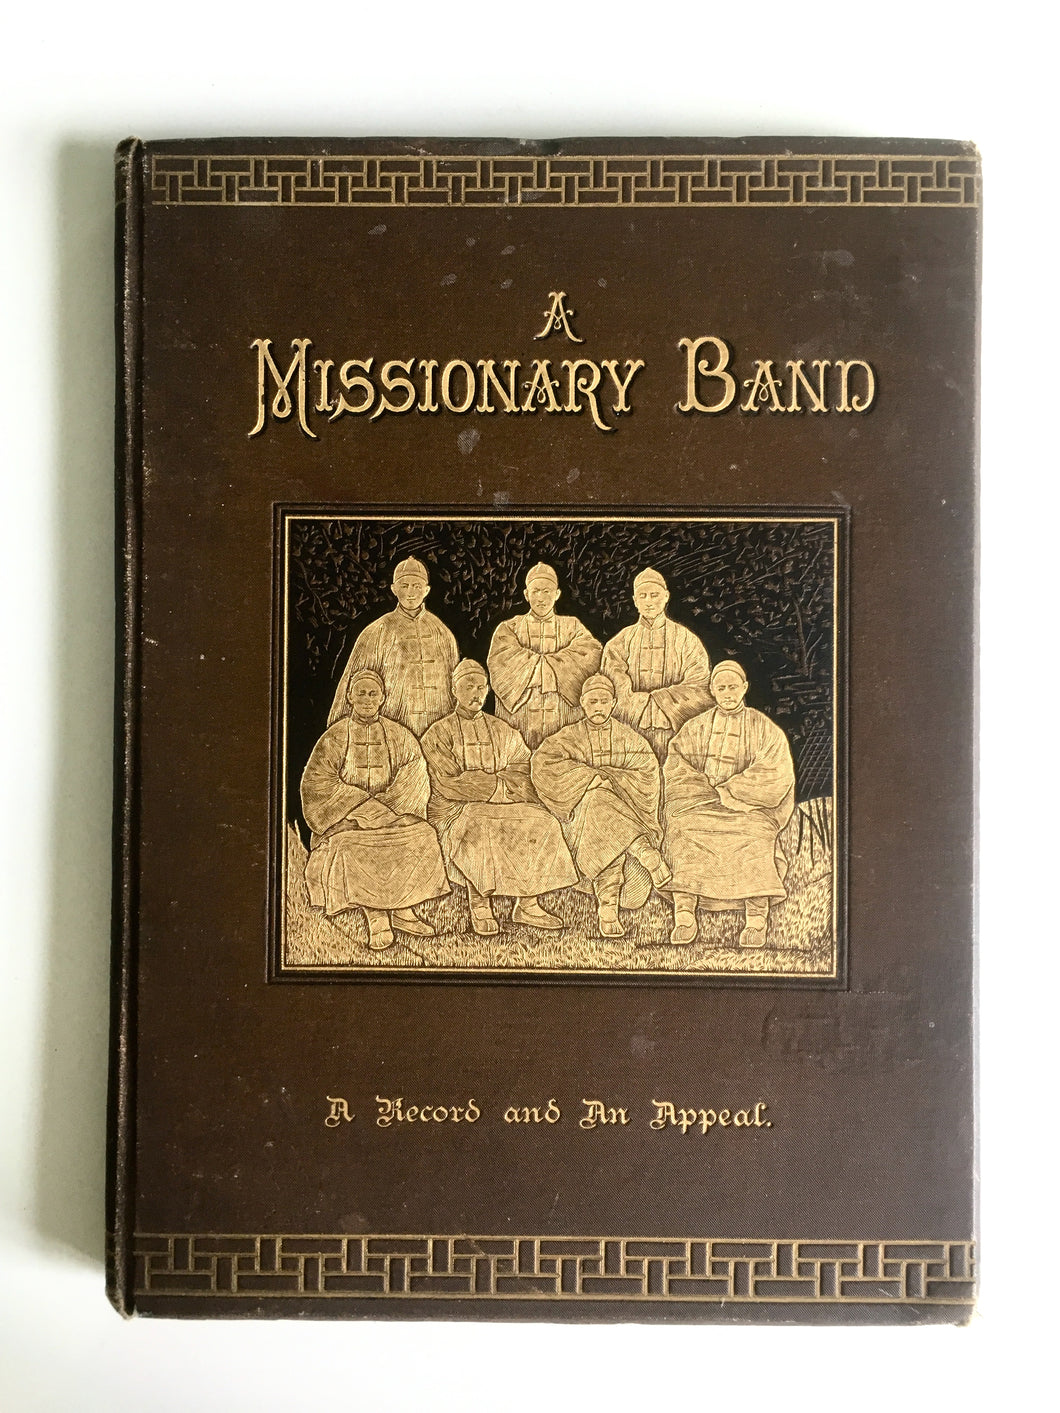 1886 HUDSON TAYLOR. A Missionary Band: A Record of an Appeal. Rare History of Cambridge 7!